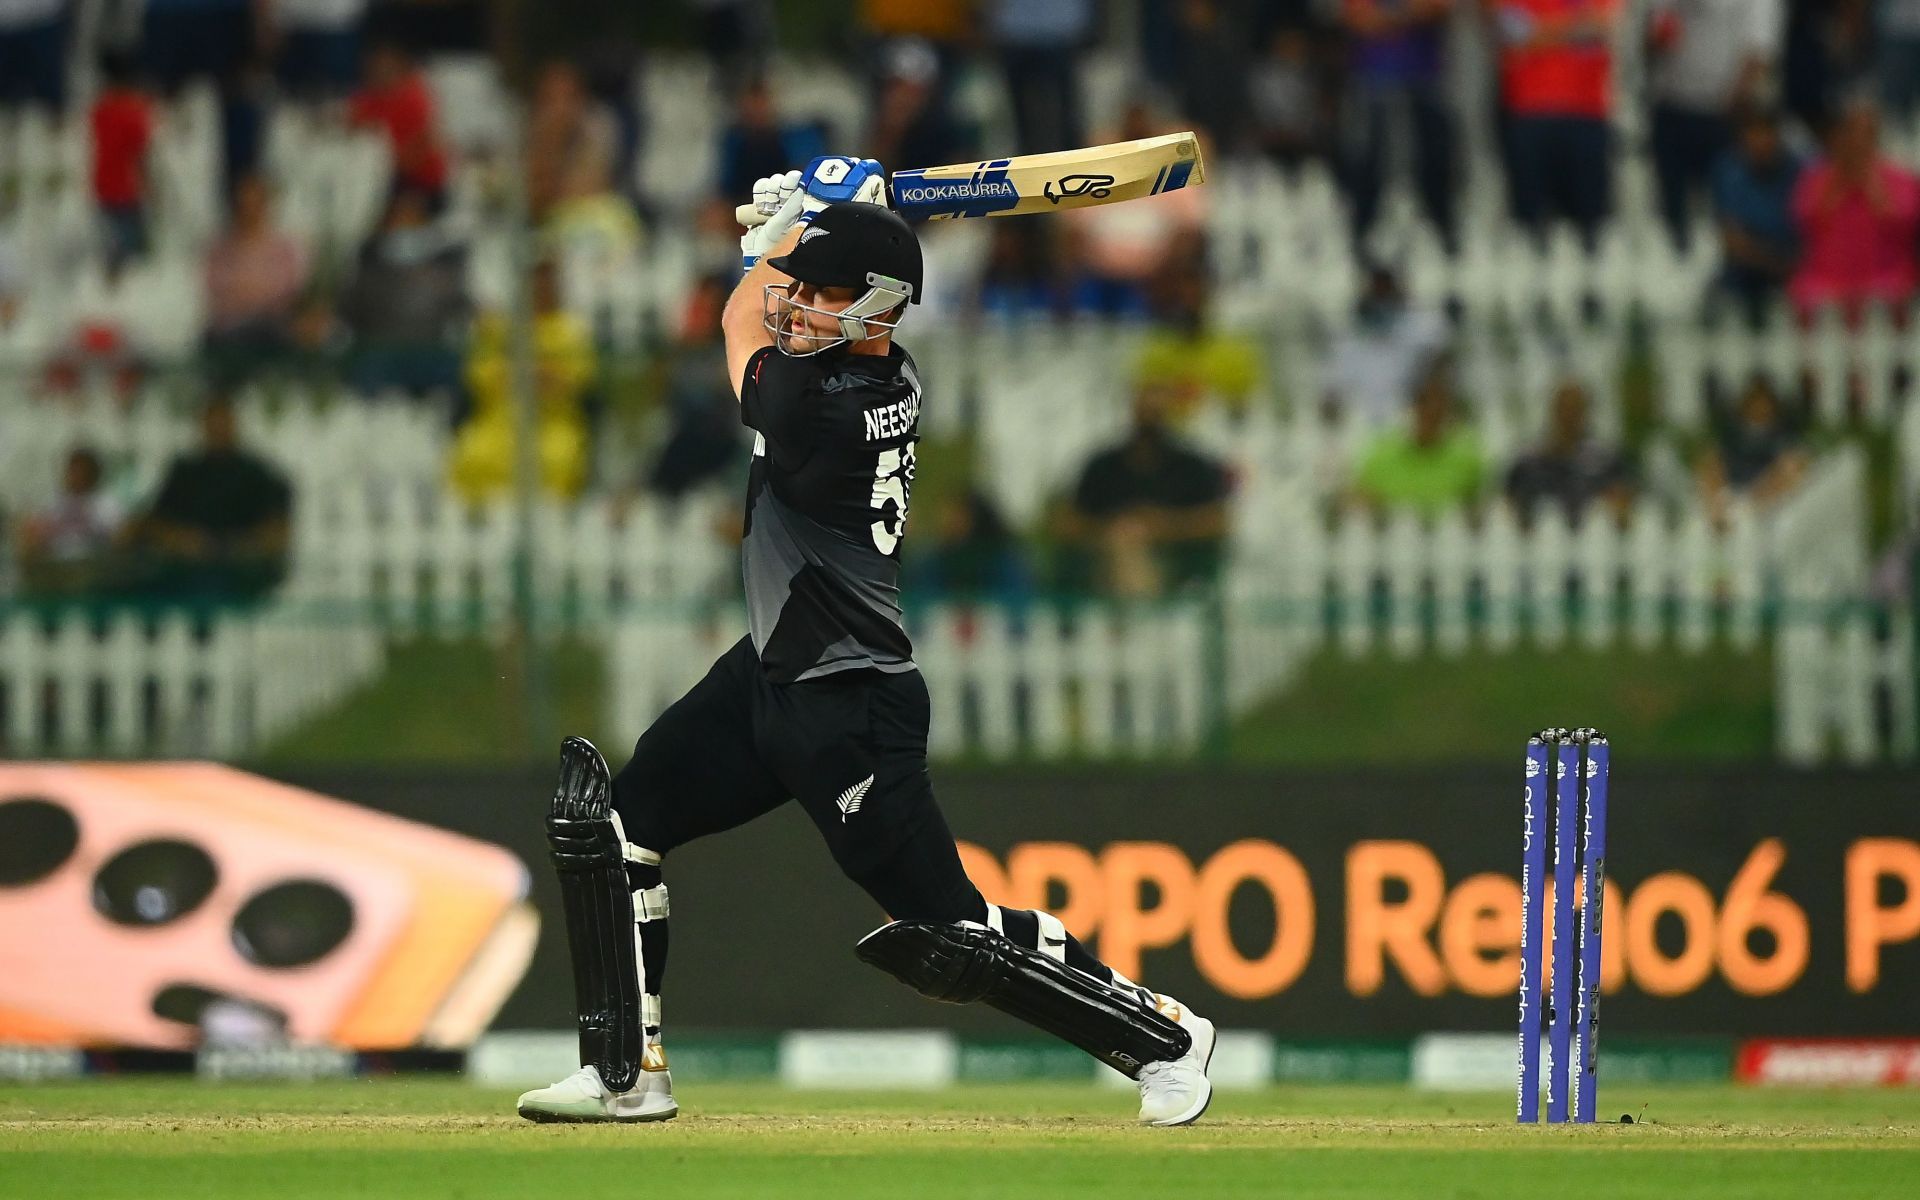 James Neesham scored 27 runs off 11 deliveries against England two nights ago